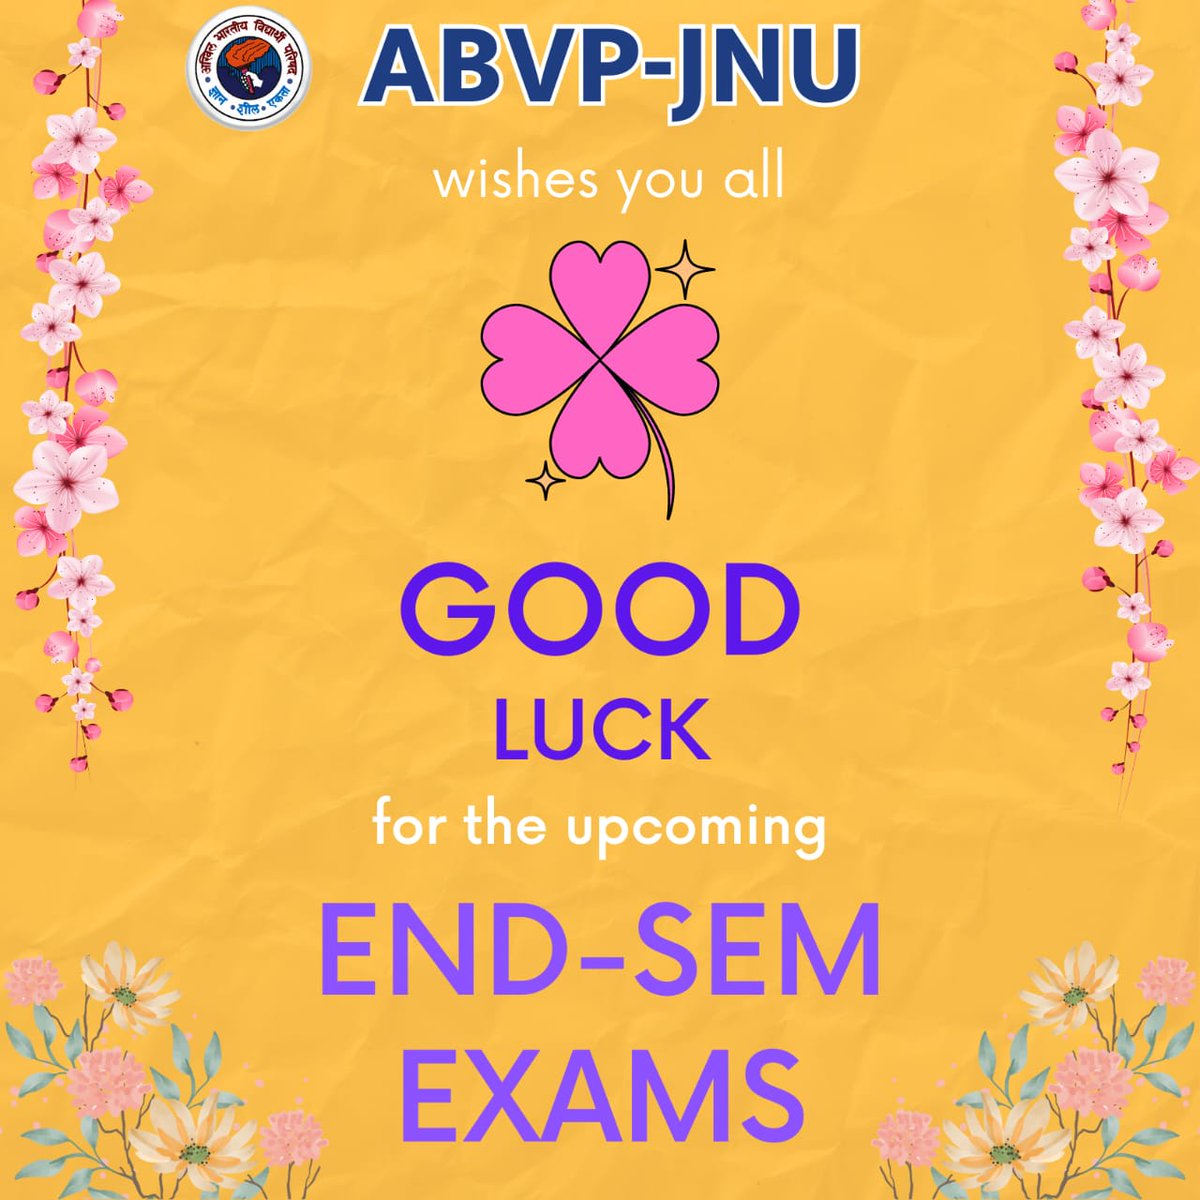 ABVP-JNU wishes you all GOOD LUCK for the upcoming END-SEM EXAMS. #JNU #ABVP